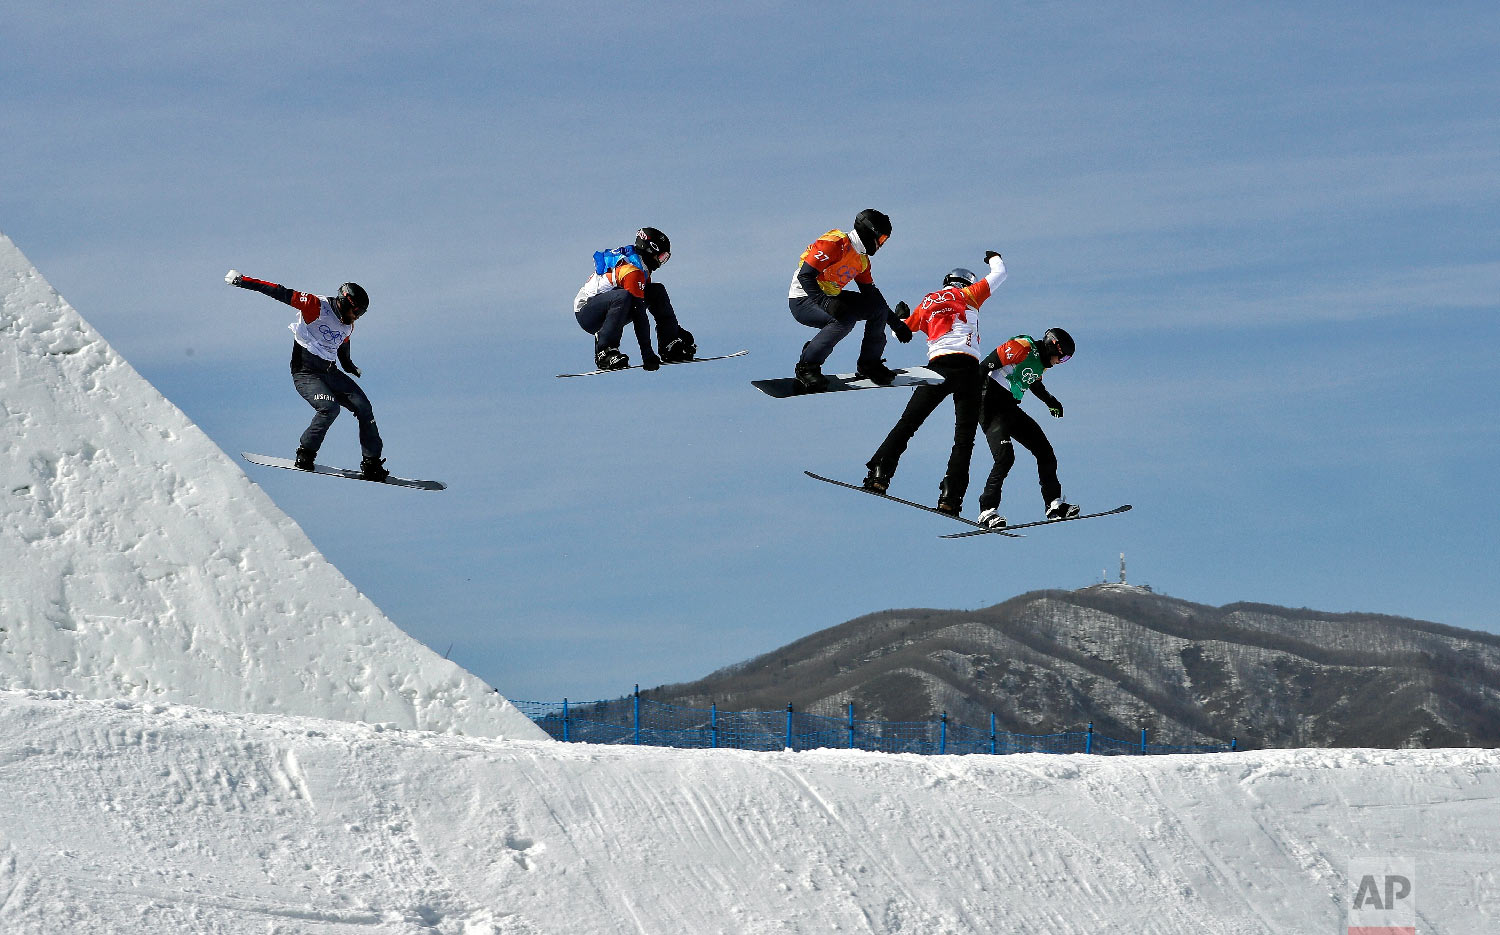  Form left; Lukas Pachner, of Austria, Jonathan Cheever, of the United States, Mick Dierdorff, of the United States, Regino Hernandez, of Spain, and Paul Berg, of Germany, run the course during the men's snowboard cross elimination round at Phoenix S